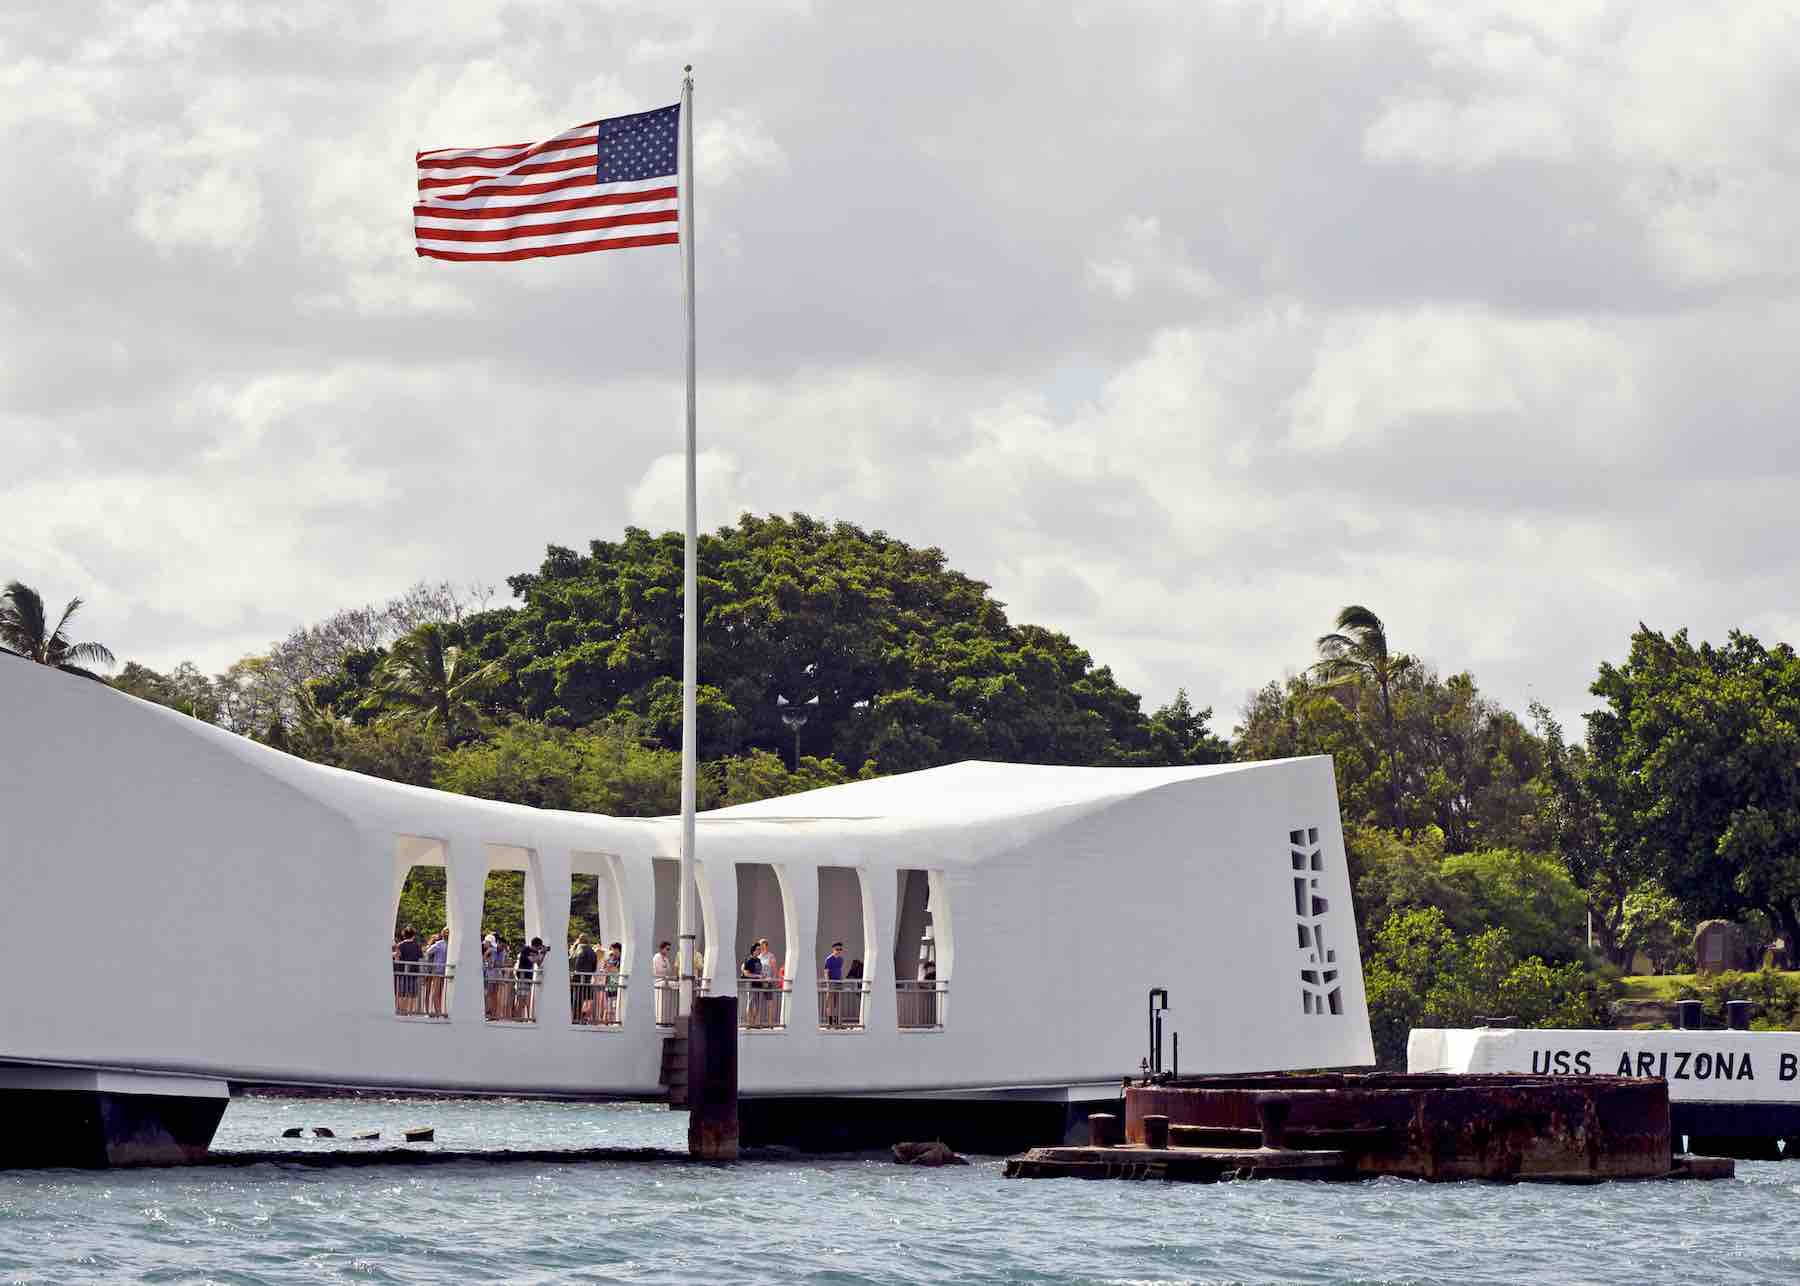 Find out how to plan a Military Vacation to Hawaii by top Hawaii blog Hawaii Travel with Kids. Image of the USS Arizona memorial at Pearl Harbor on the island of Oahu, Hawaii.